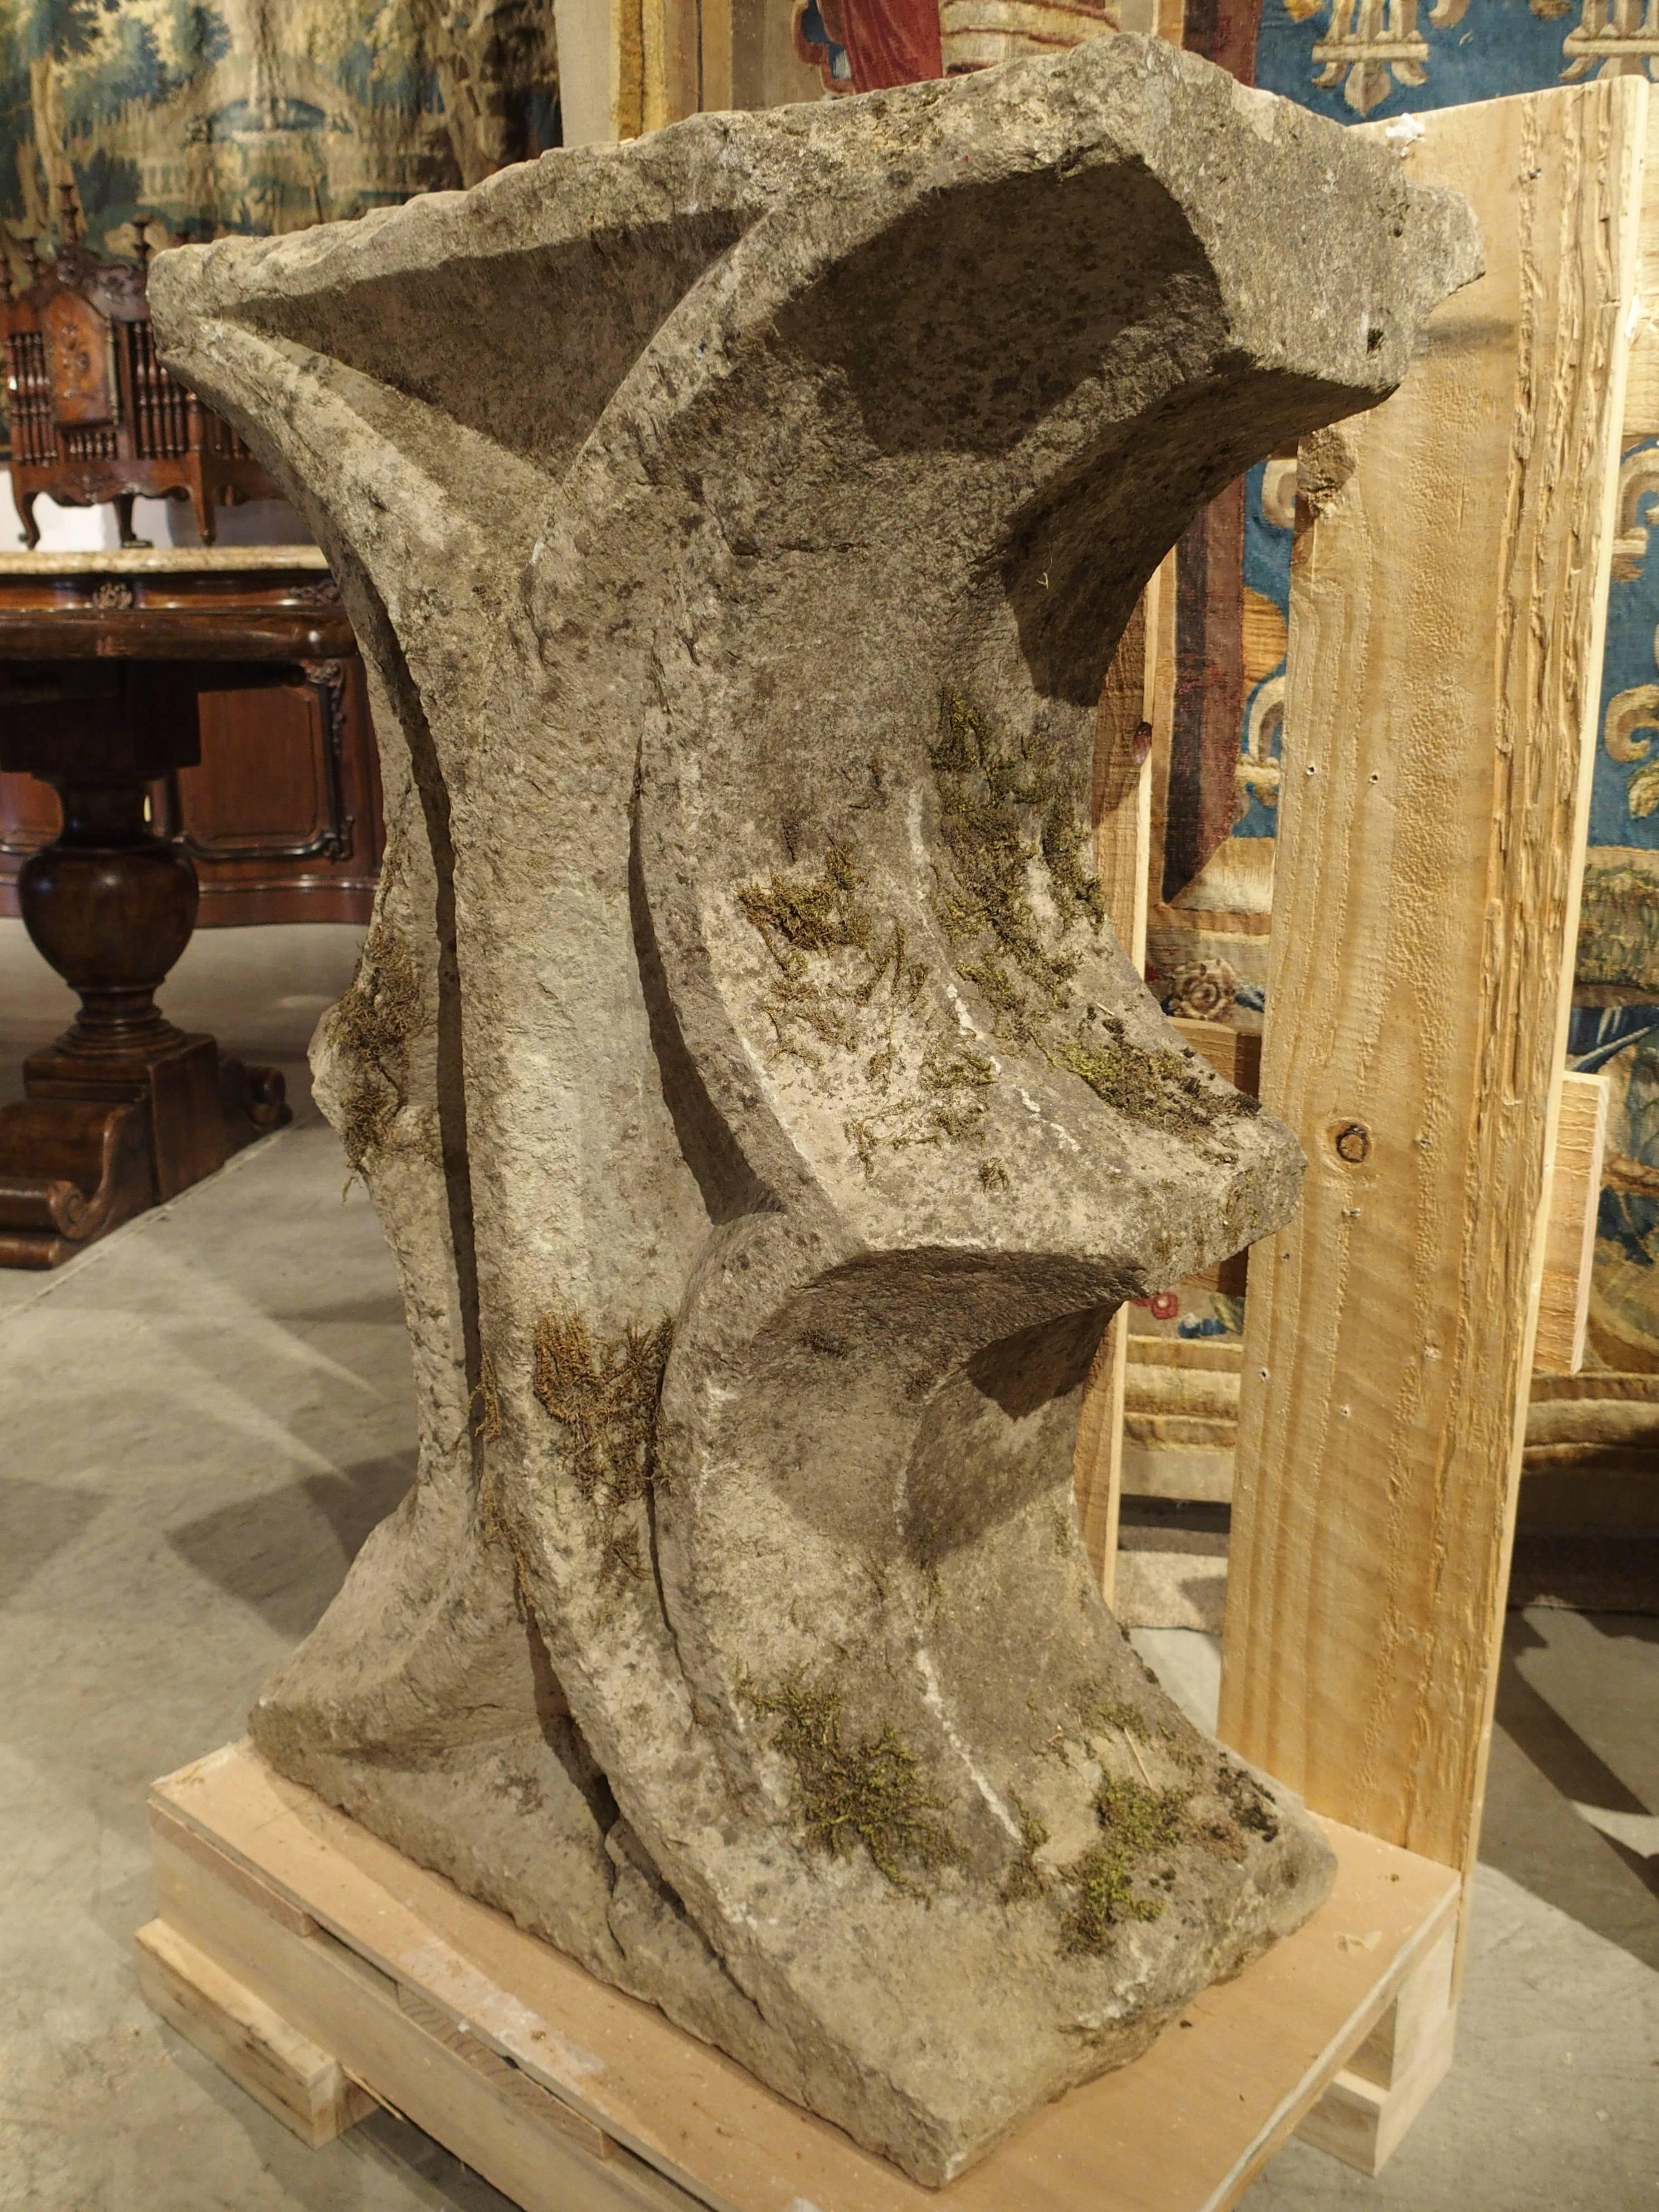 This fabulous French Gothic architectural fragment dates to the 1400s. It was possibly the interior section between two, partial C-scrolls and cusps of a circular Gothic cinquefoil. As a rare and extremely old fragment, it can be displayed as a